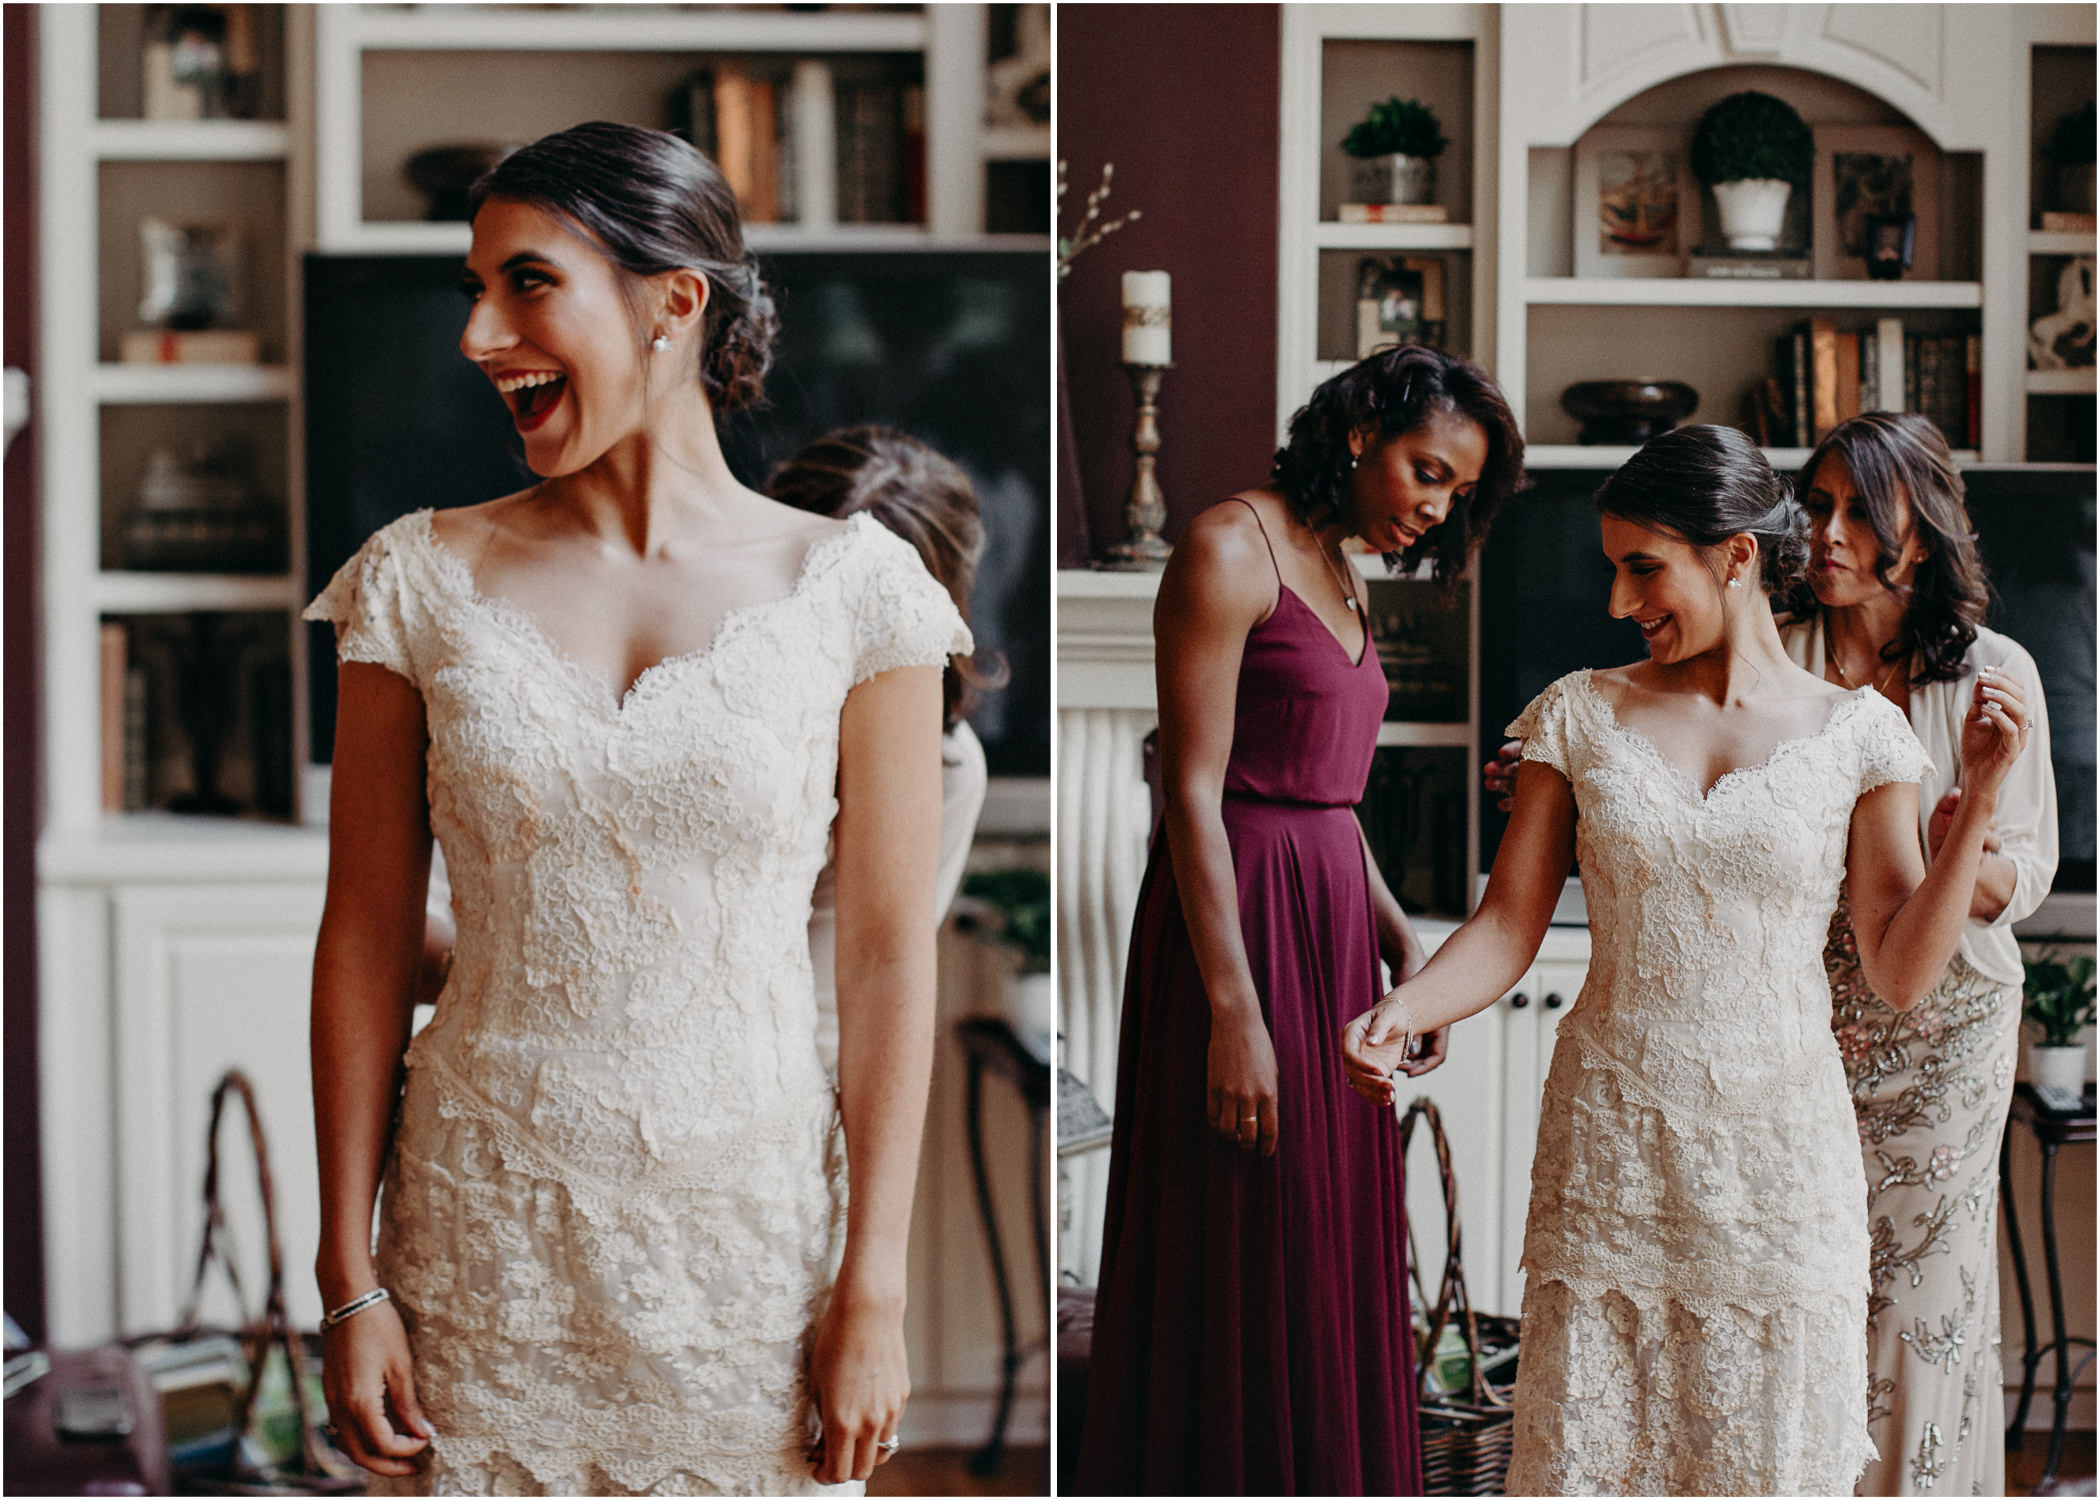 22 Bride getting ready pictures before ceremony- Weding day, Atlanta-Ga Photographer .jpg